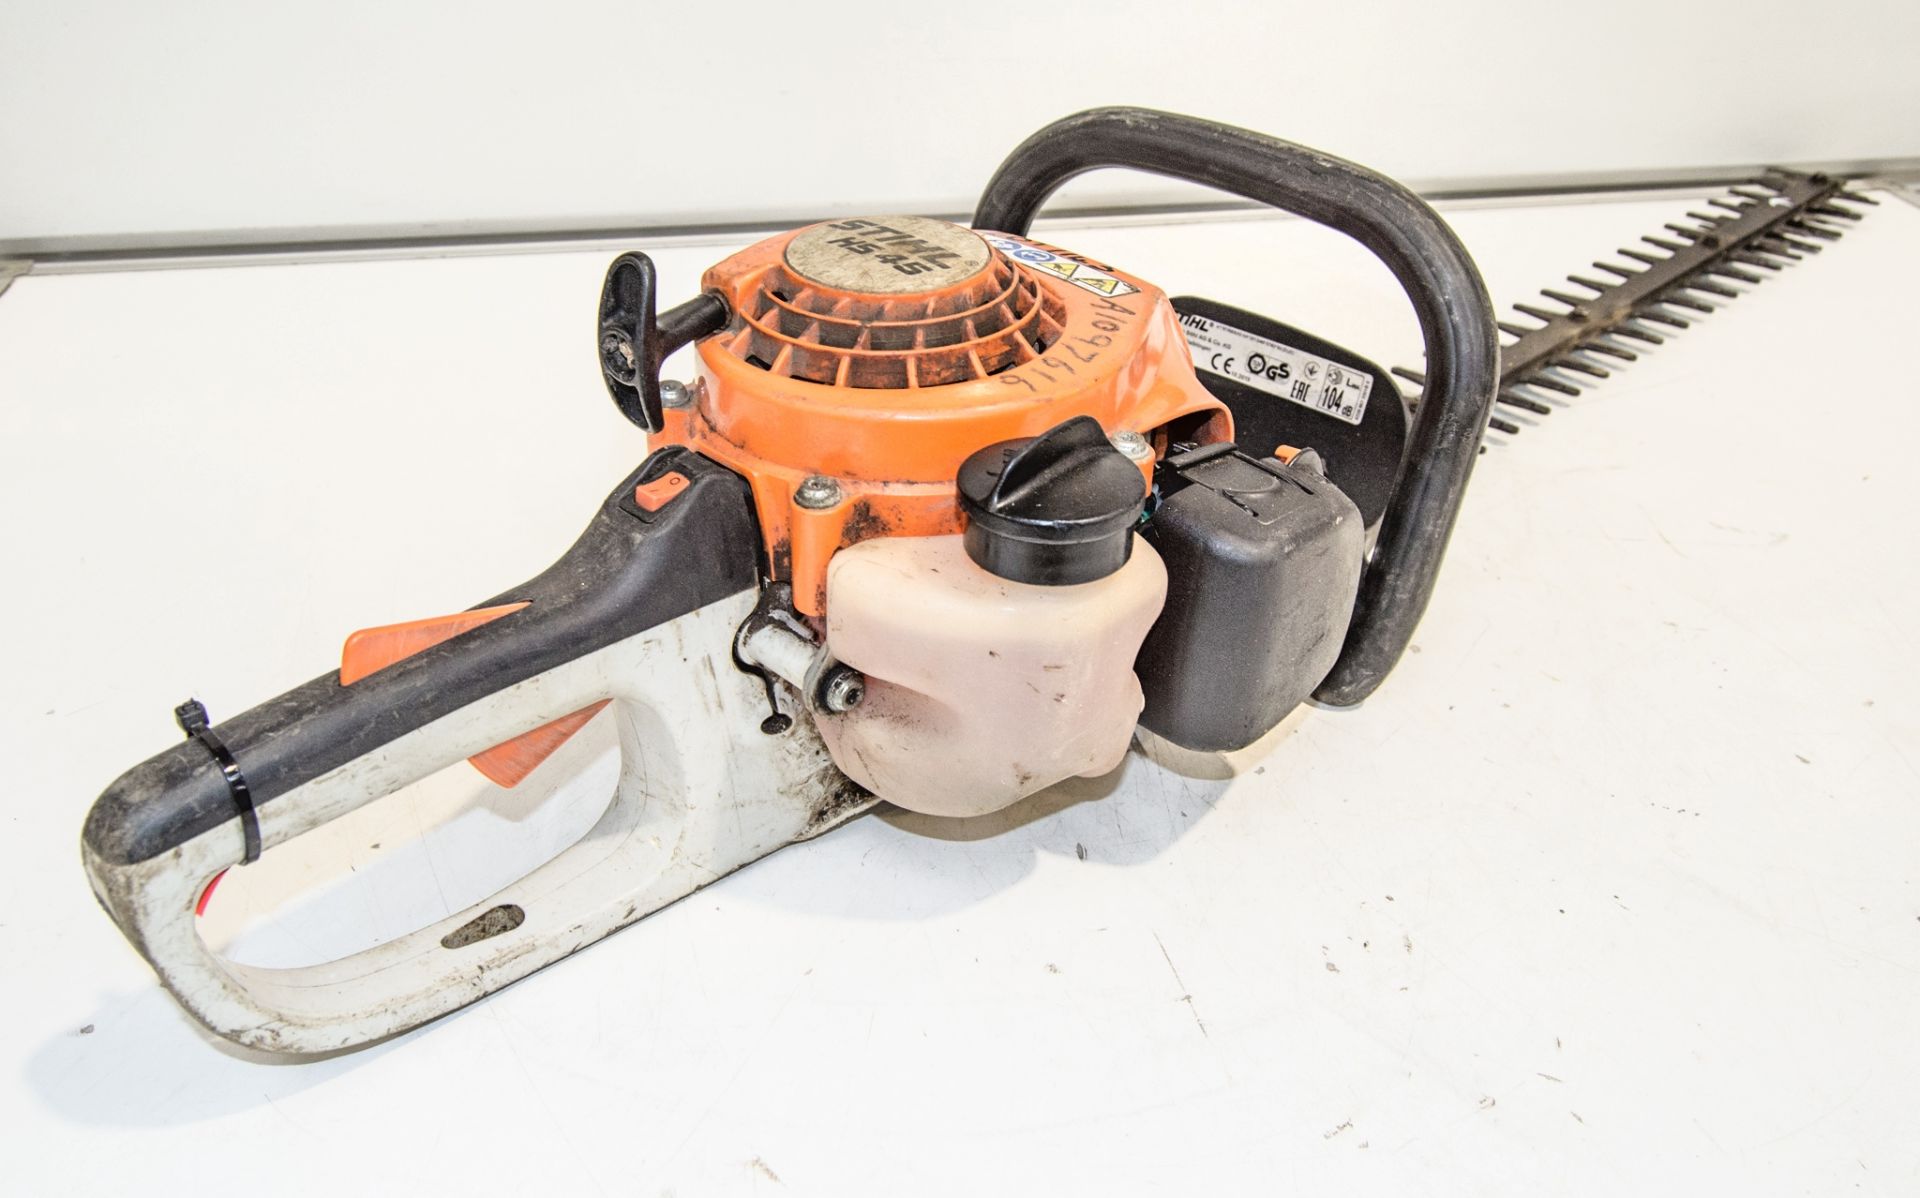 Stihl HS45 petrol driven hedge cutter A1097616 - Image 2 of 2